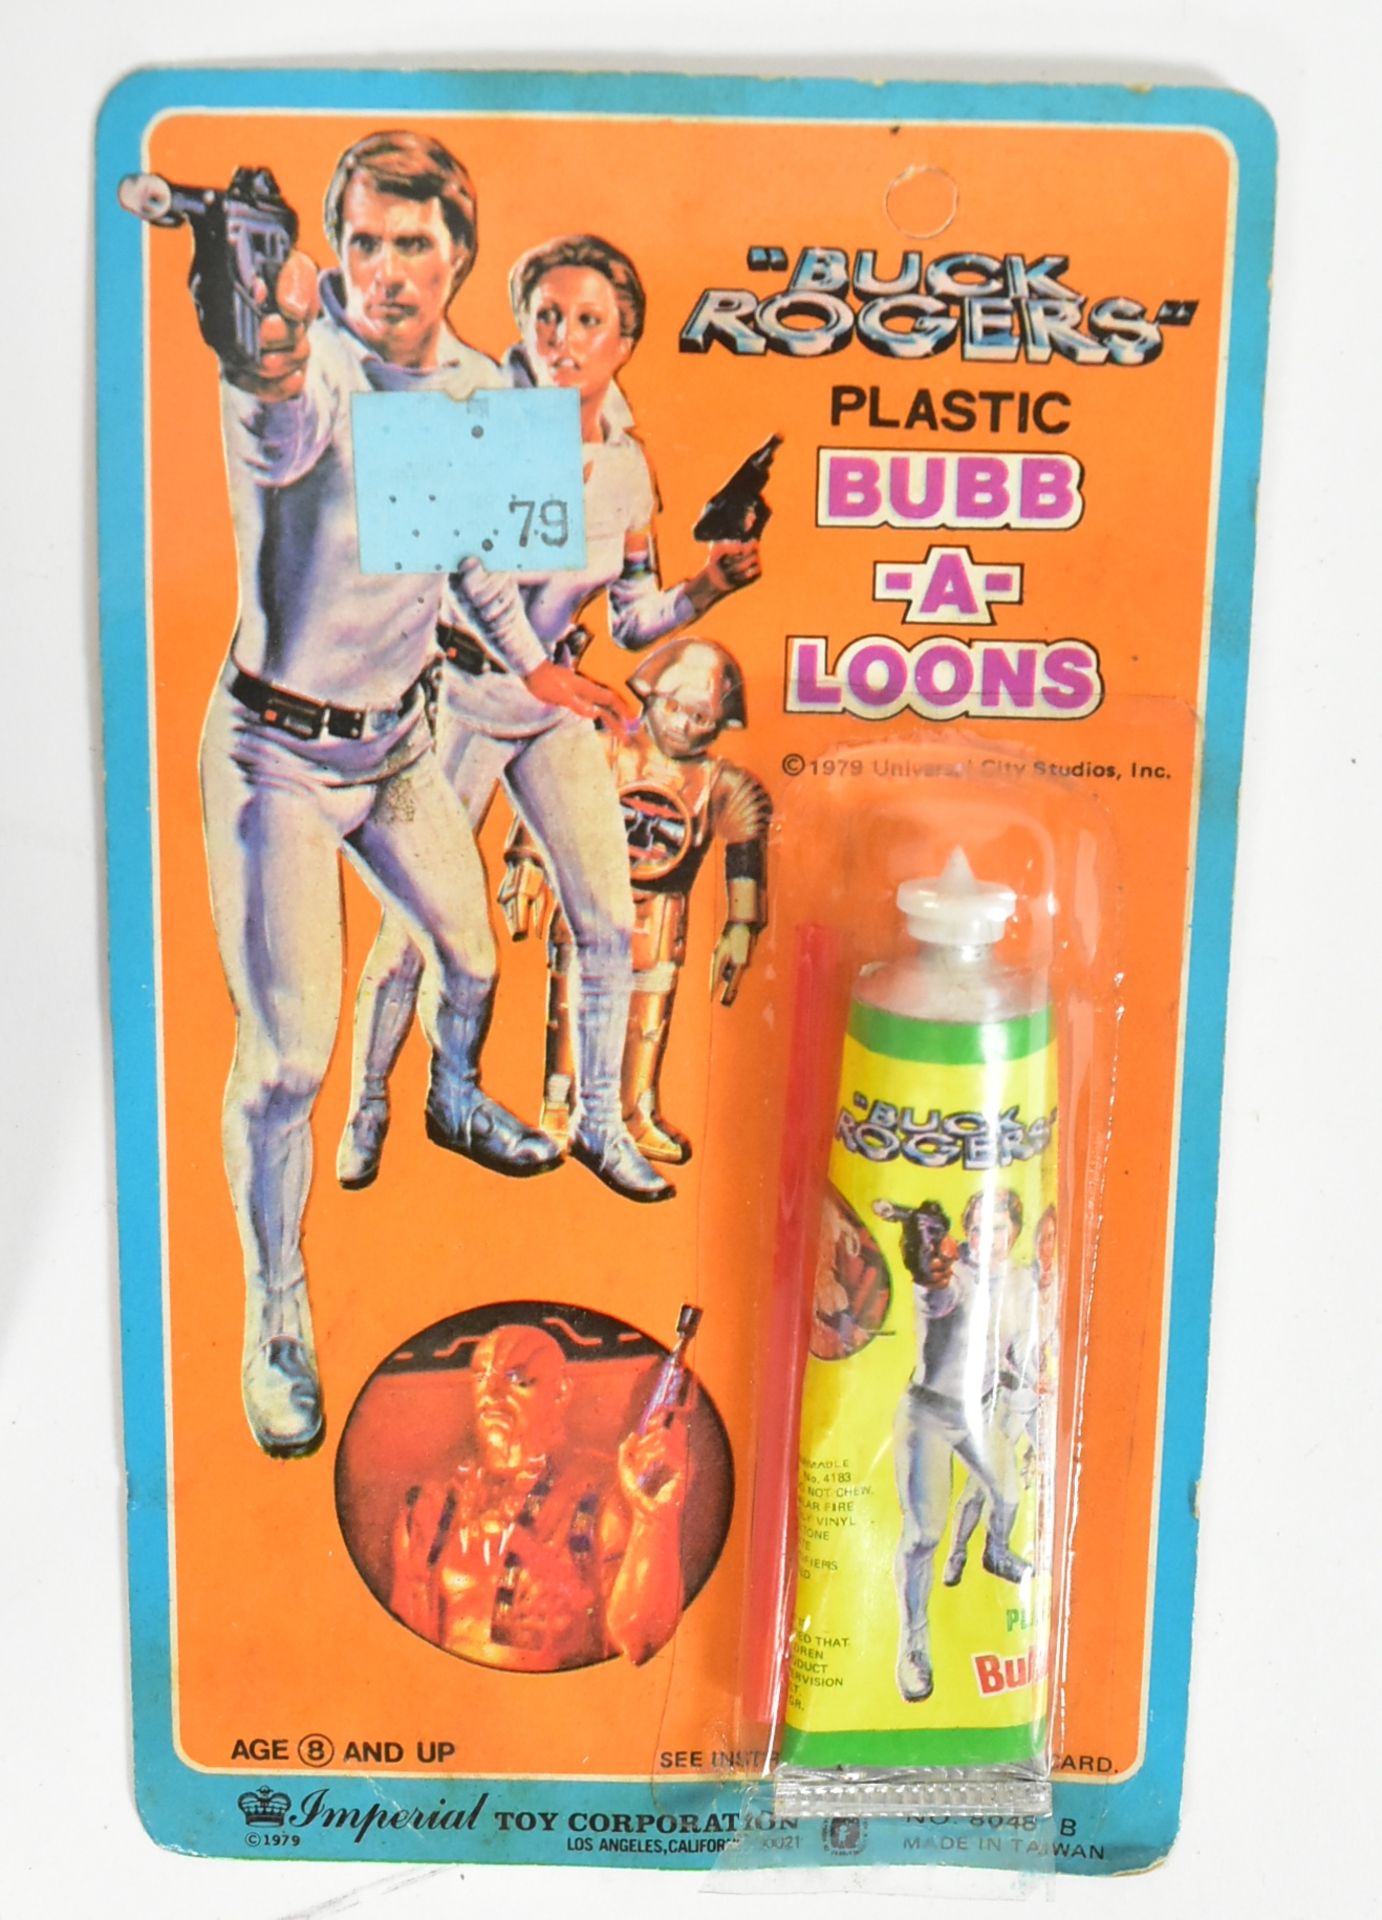 BUCK ROGERS - COLLECTION OF VINTAGE MEMORABILIA - Image 3 of 5